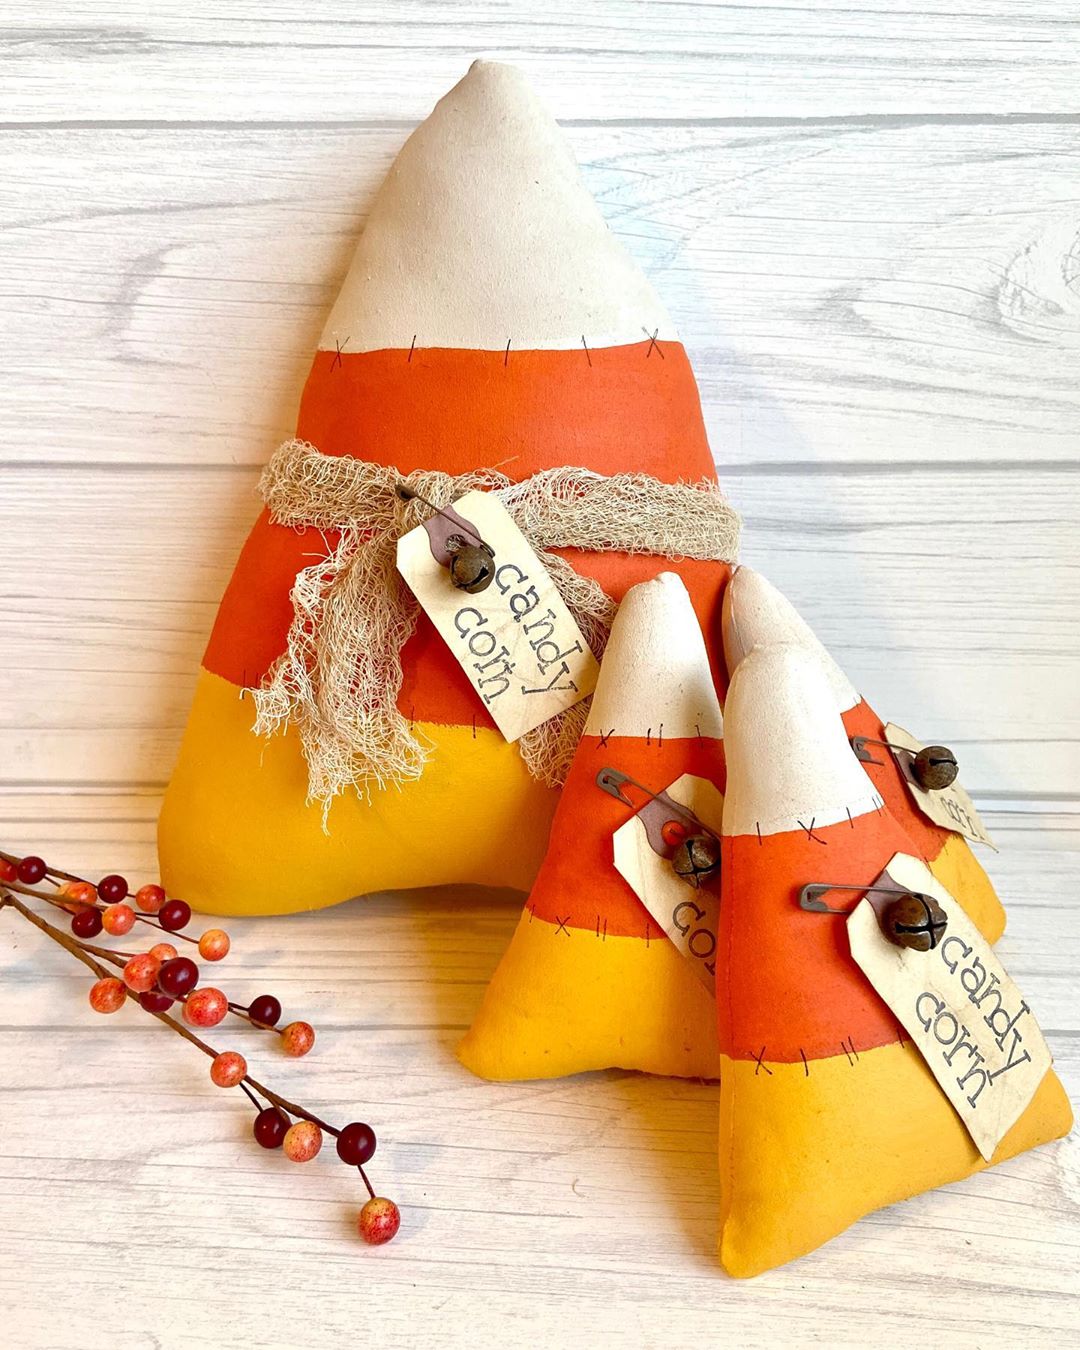 Plush Hand Made Candy Corn Pillow. Photo by Instagram user @ittybittycottage